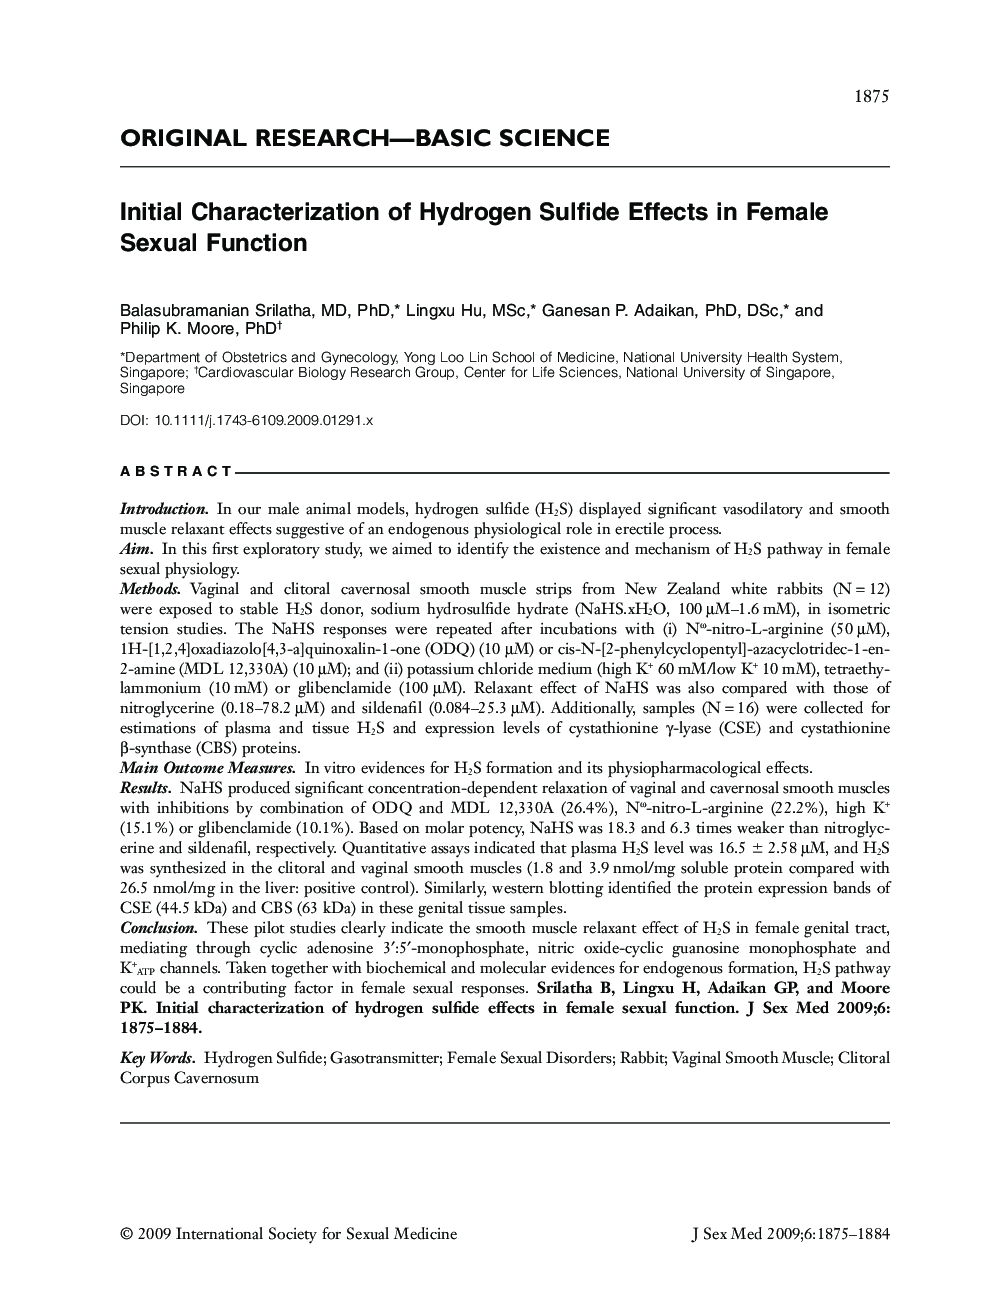 ORIGINAL RESEARCH-BASIC SCIENCE: Initial Characterization of Hydrogen Sulfide Effects in Female Sexual Function